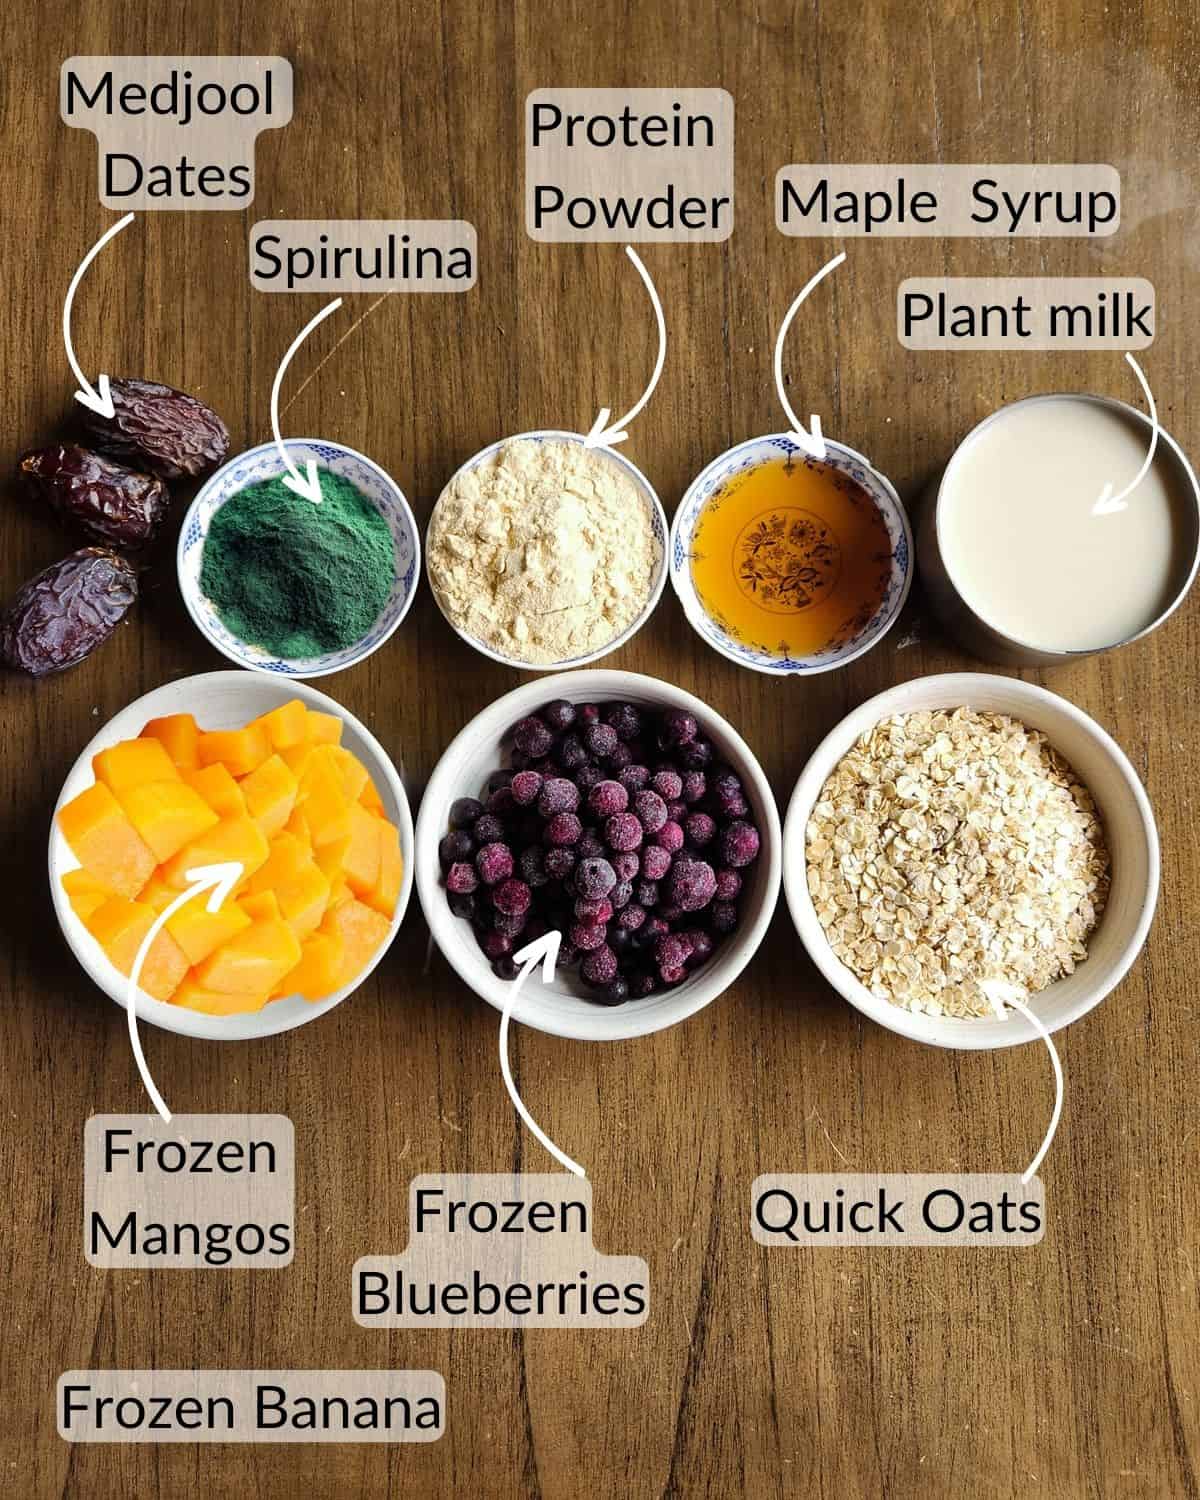 Ingredient image for making high protein overnight oatwith water. Image shows quick oats, maple syrup, protein powder, spirulina, dates, mangos, blueberries and coconut milk